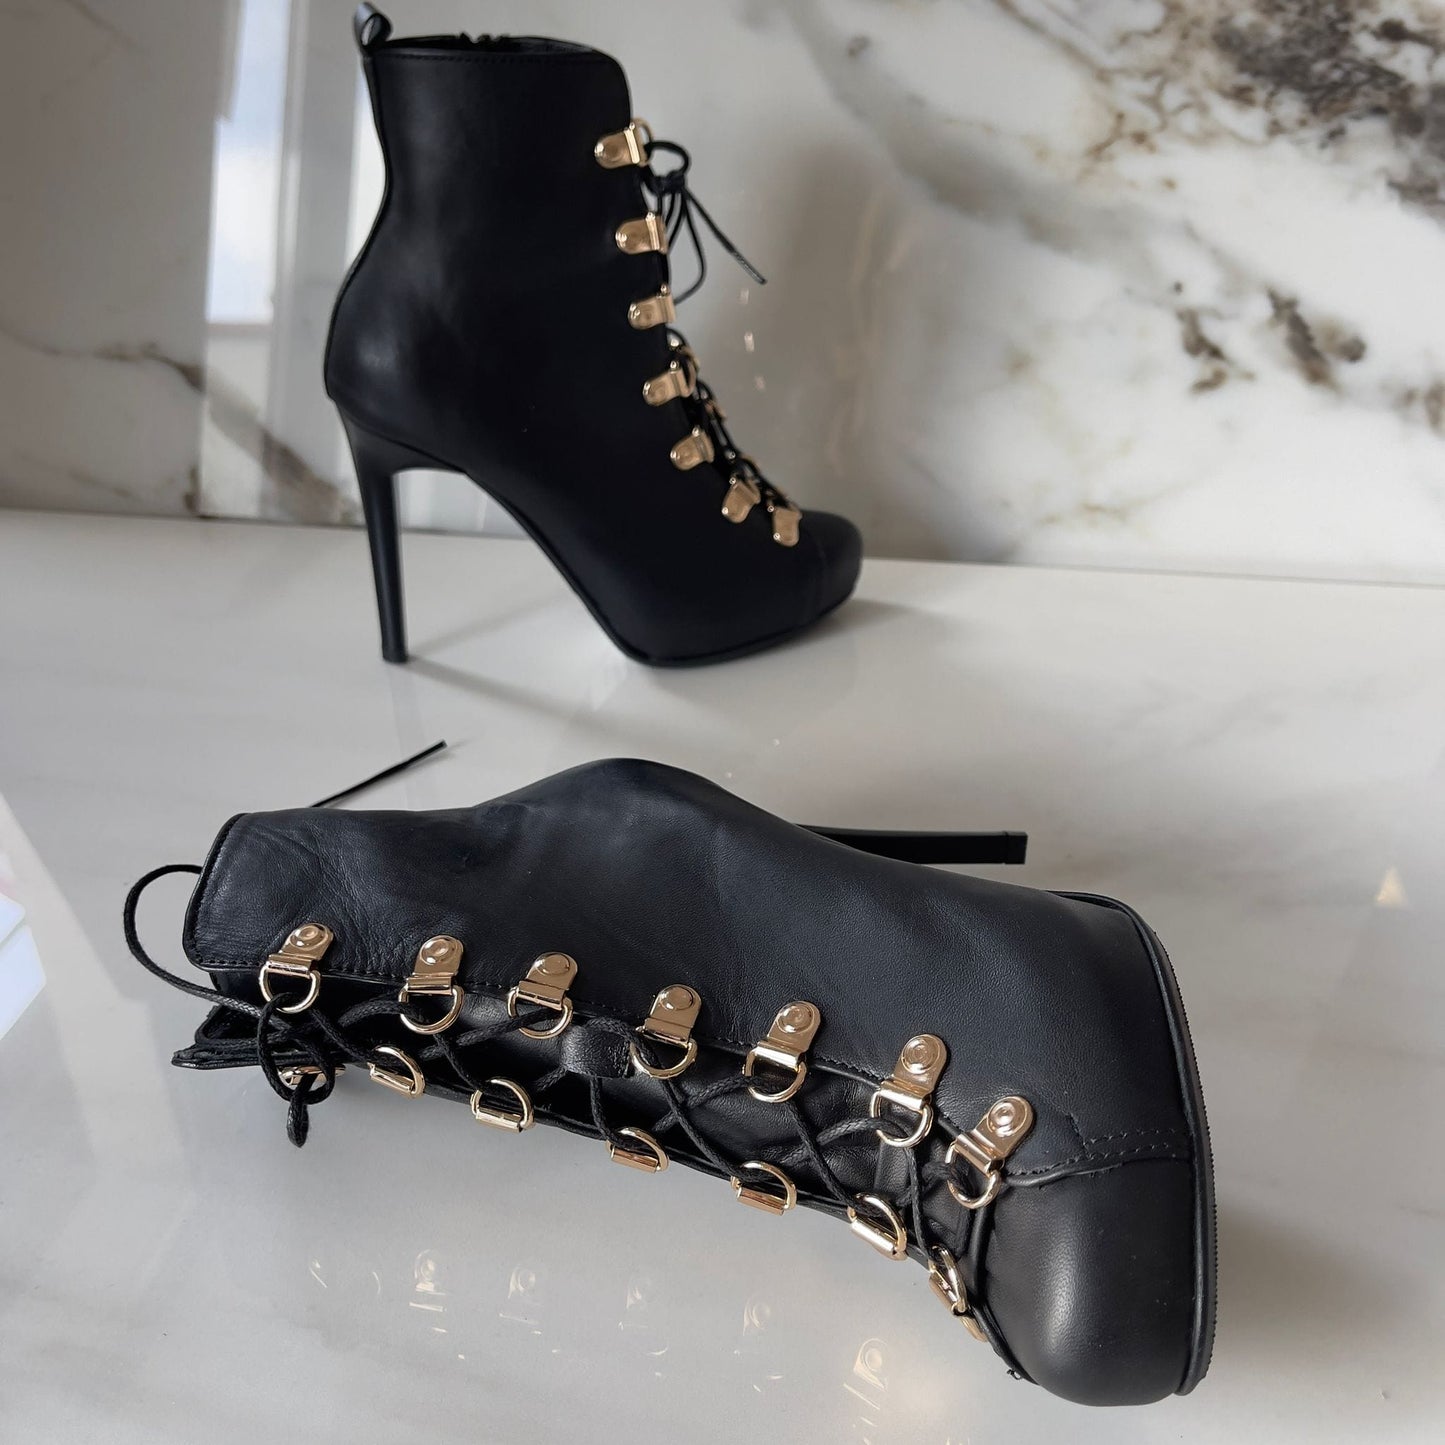 Black leather lace up gladiator style high heel boots